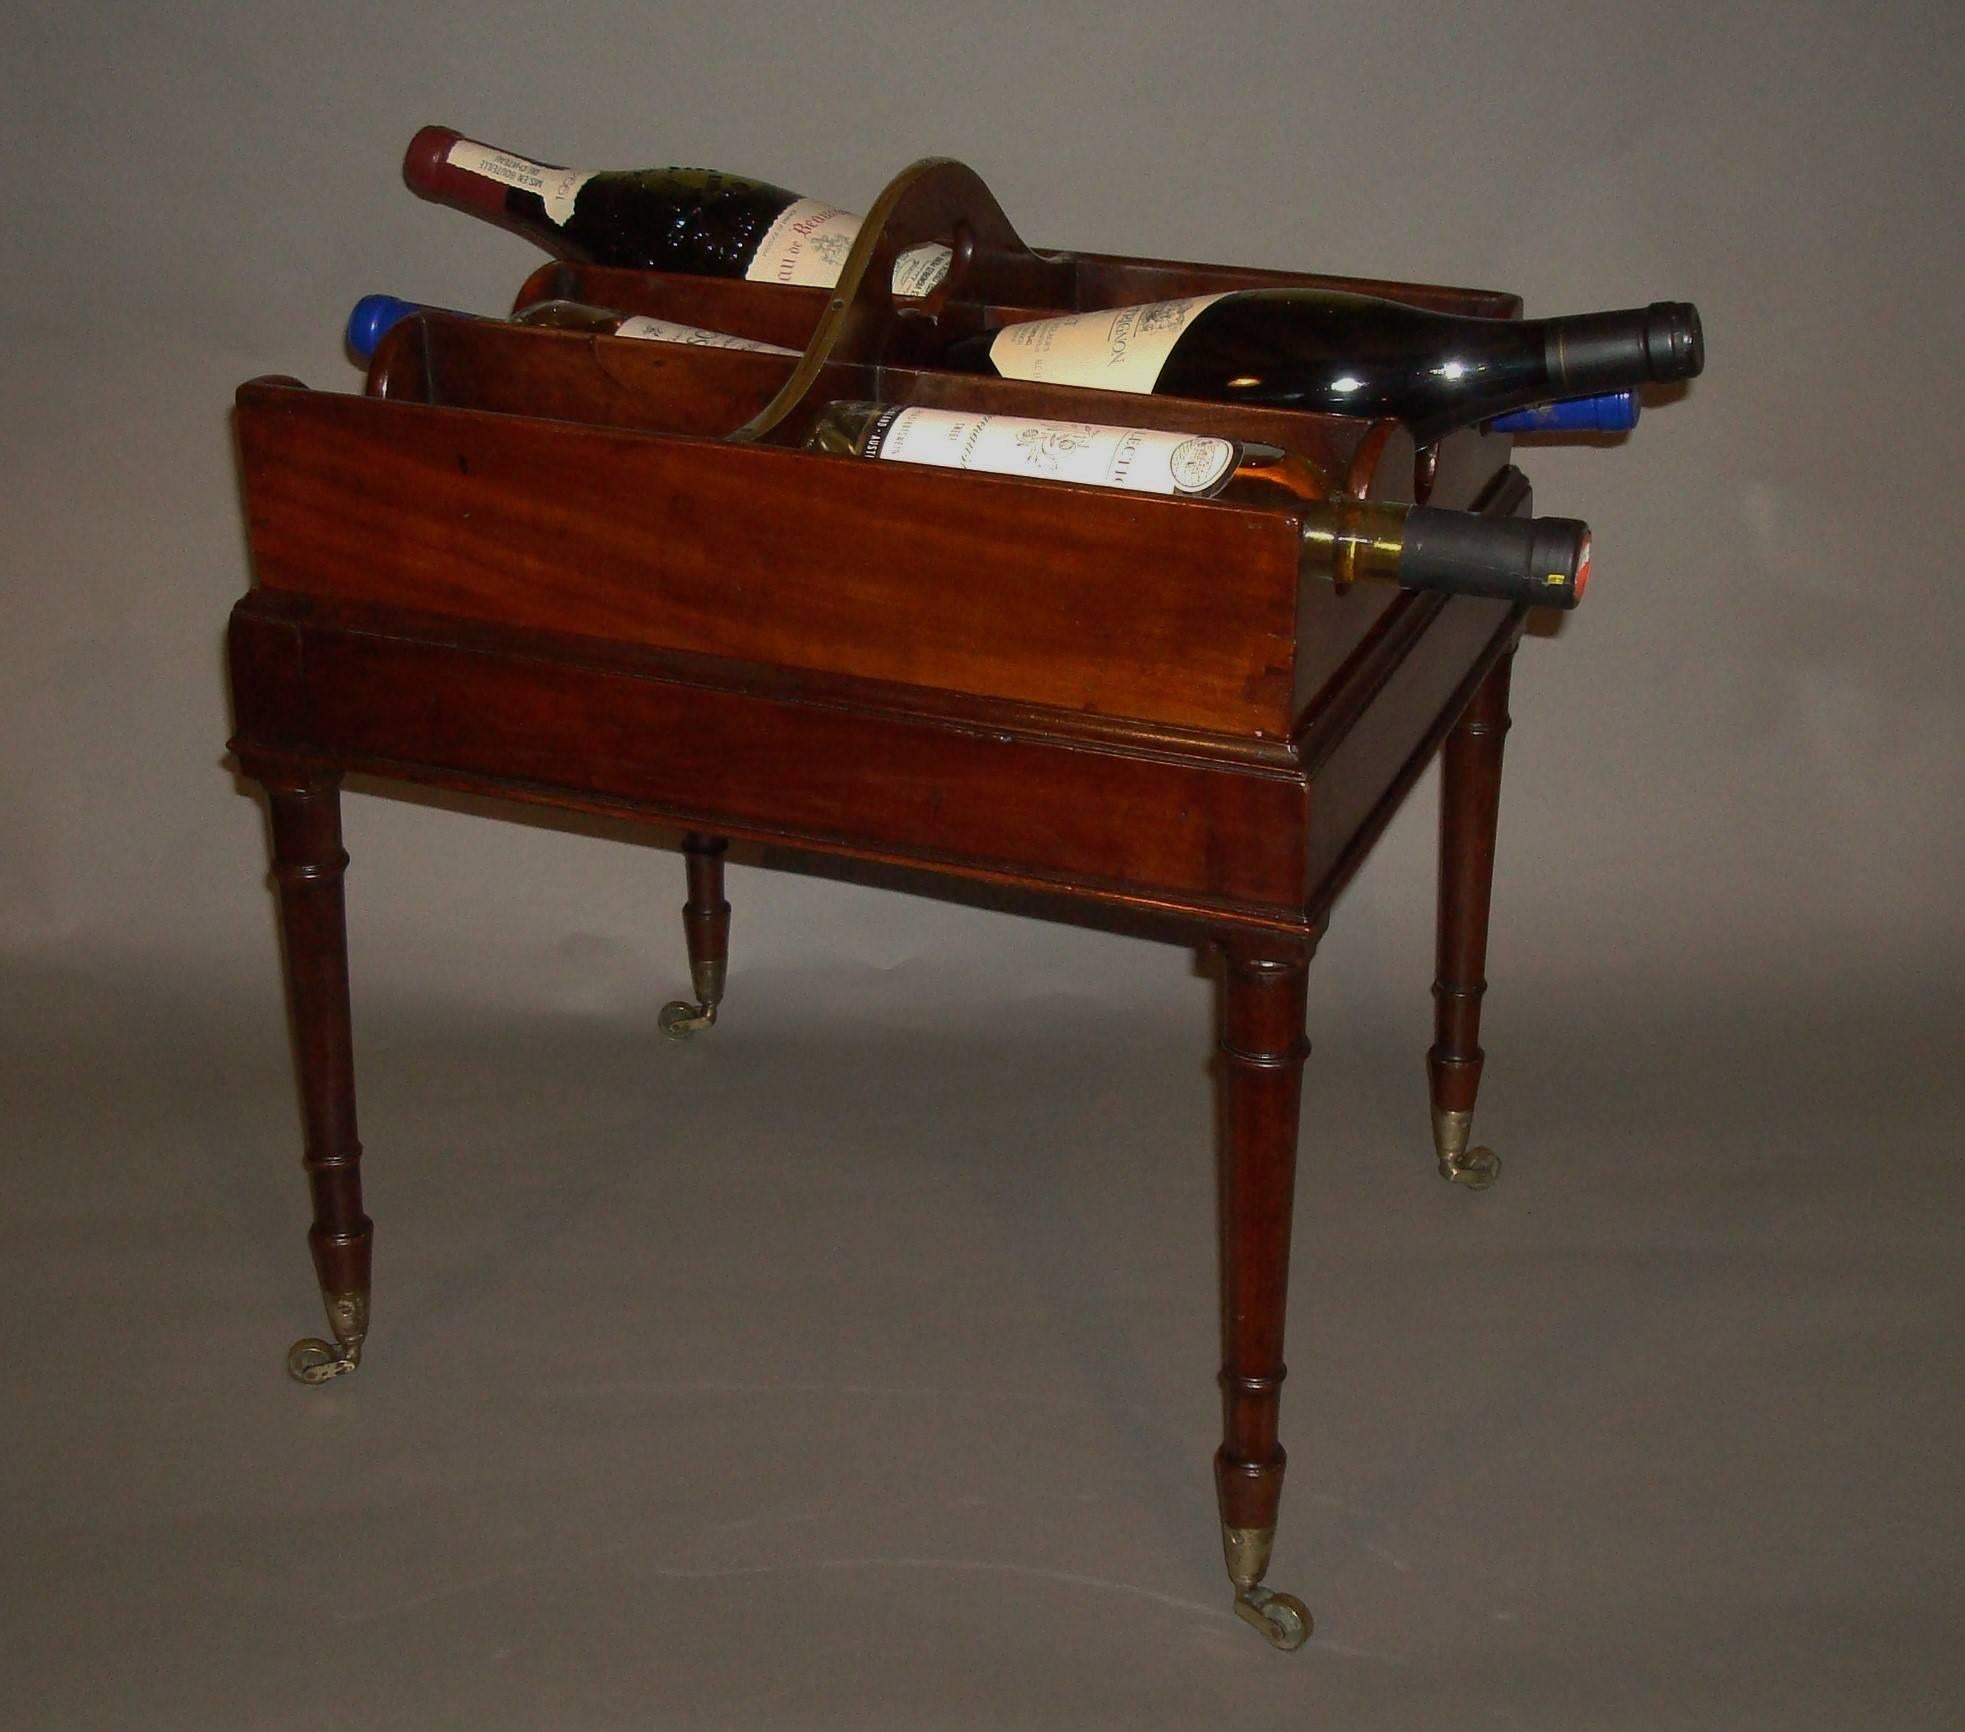 An unusual George III mahogany bottle carrier on stand; the removable bottle tray with a shaped central division and a pierced carrying handle finished with a brass moulded edge; having six divisions for wine bottles with shaped sides to house the